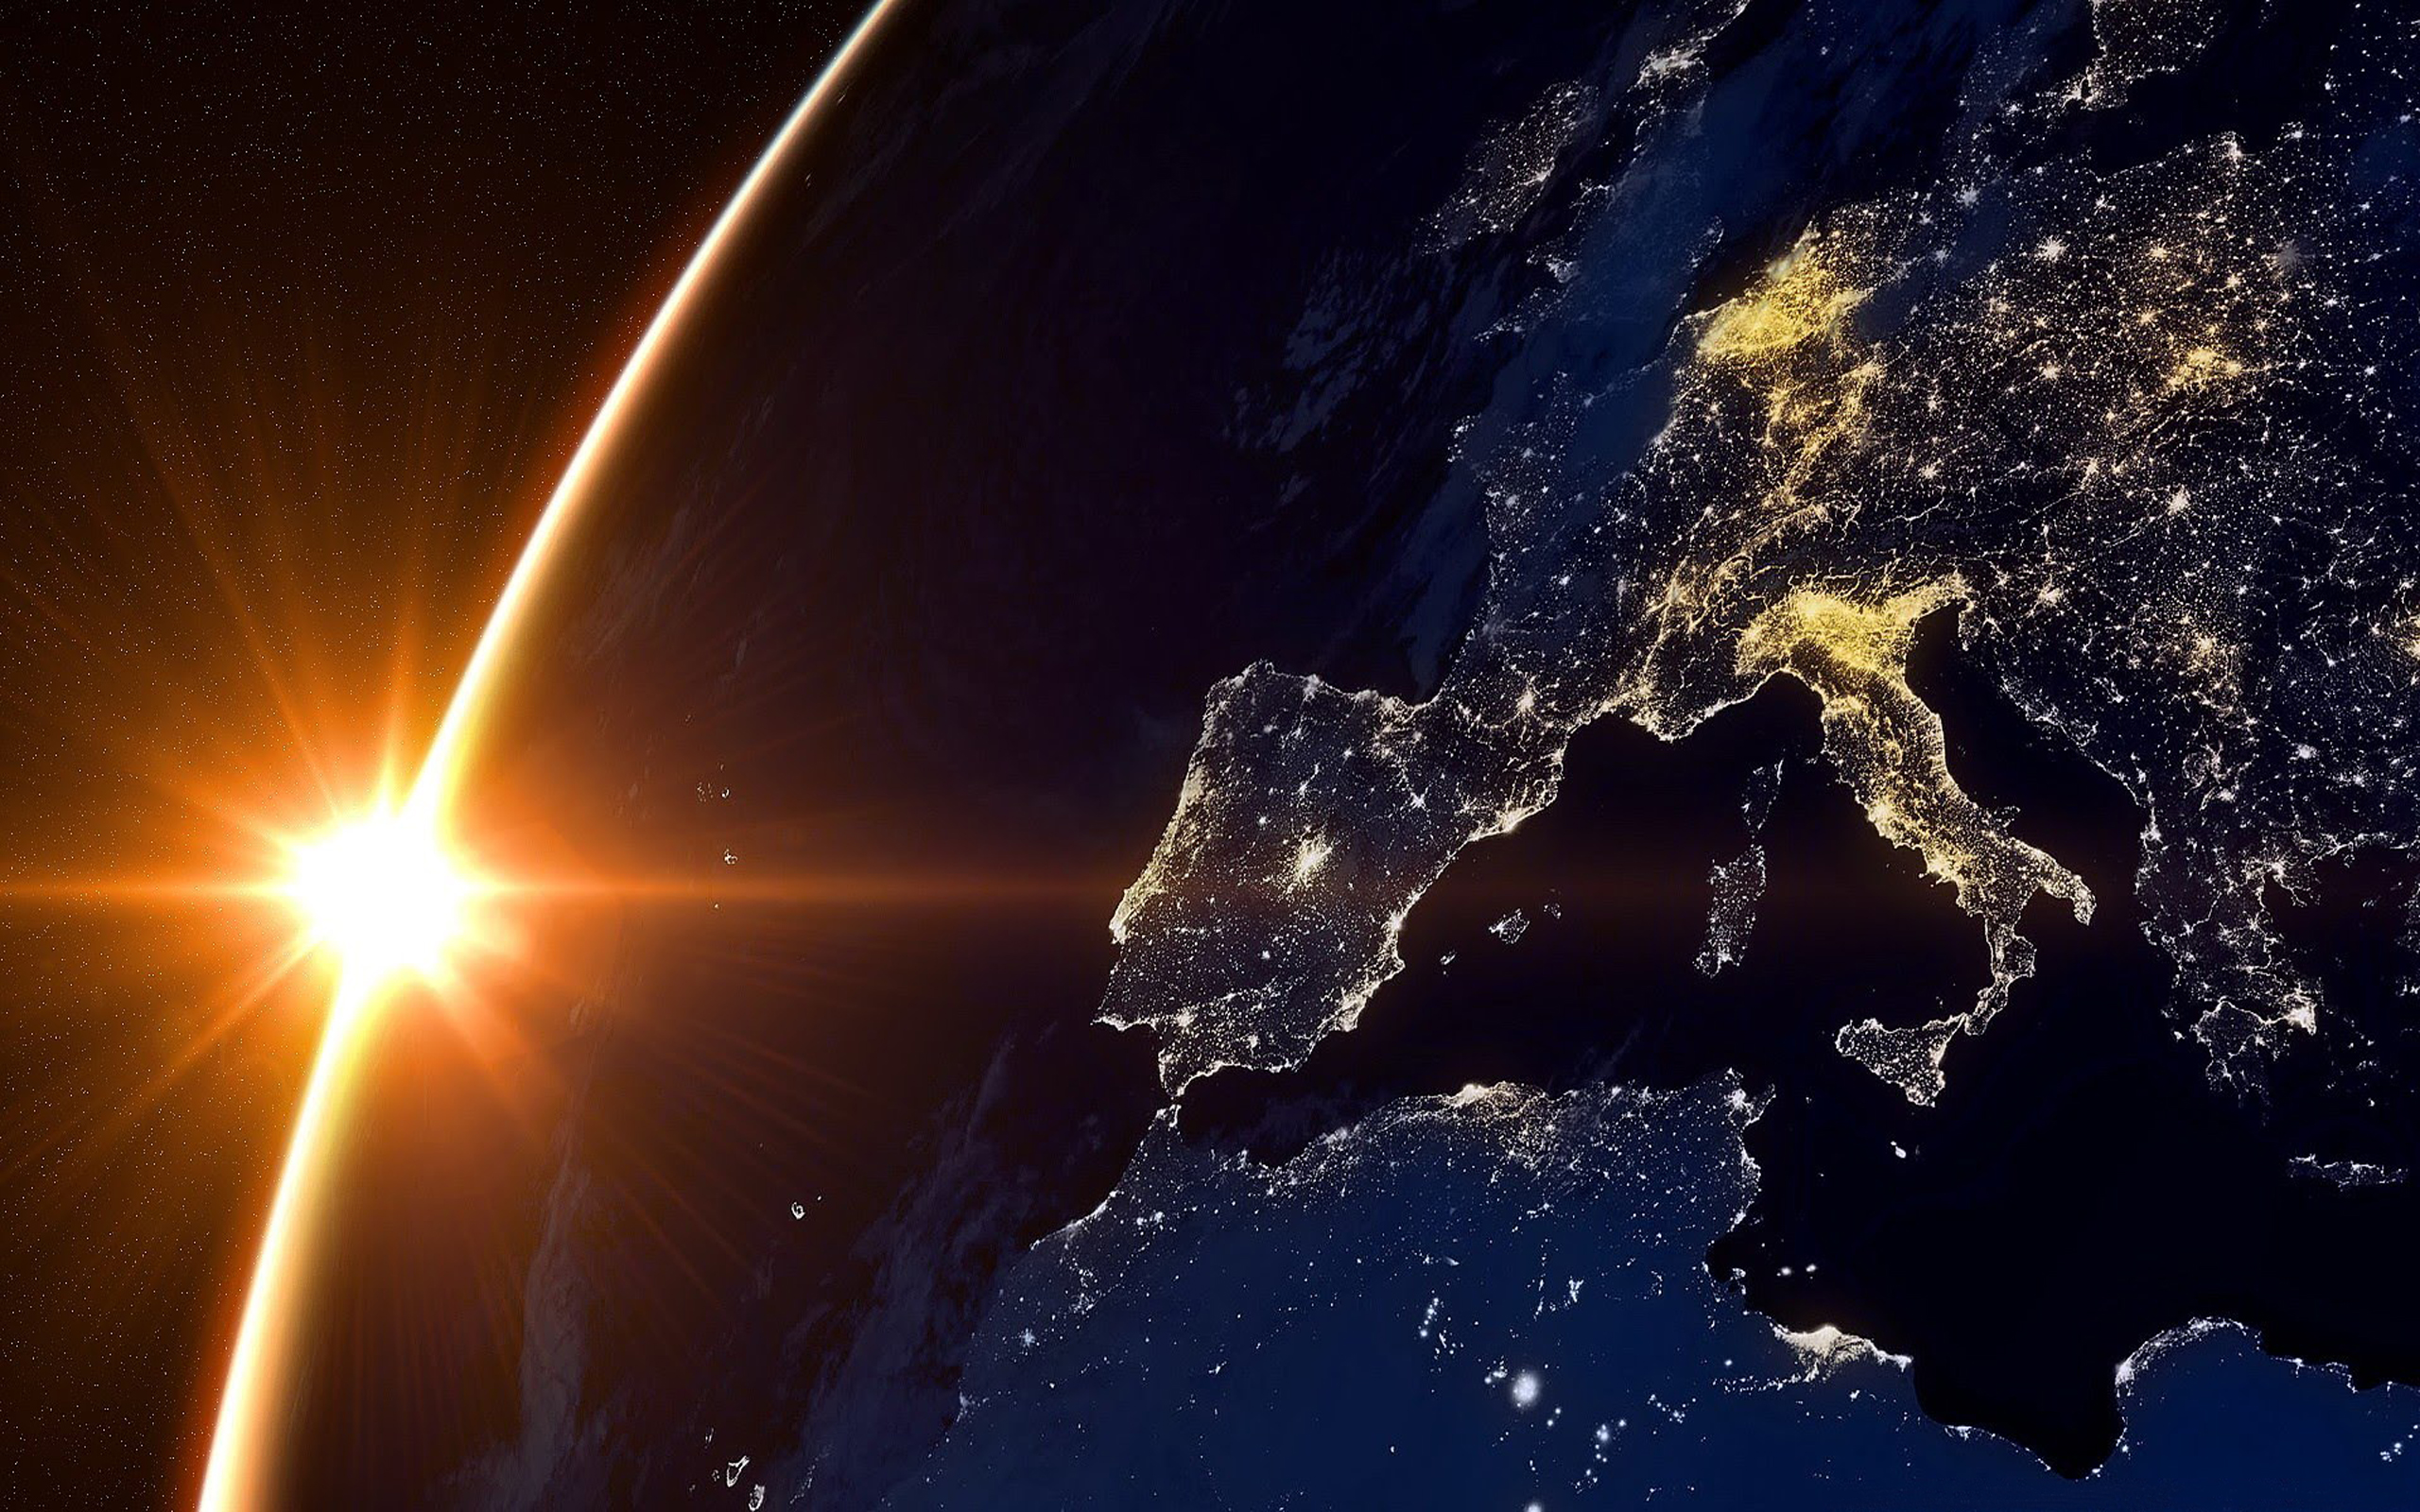 Sun And Earth From Space Europe Night Hd Wallpaper : 